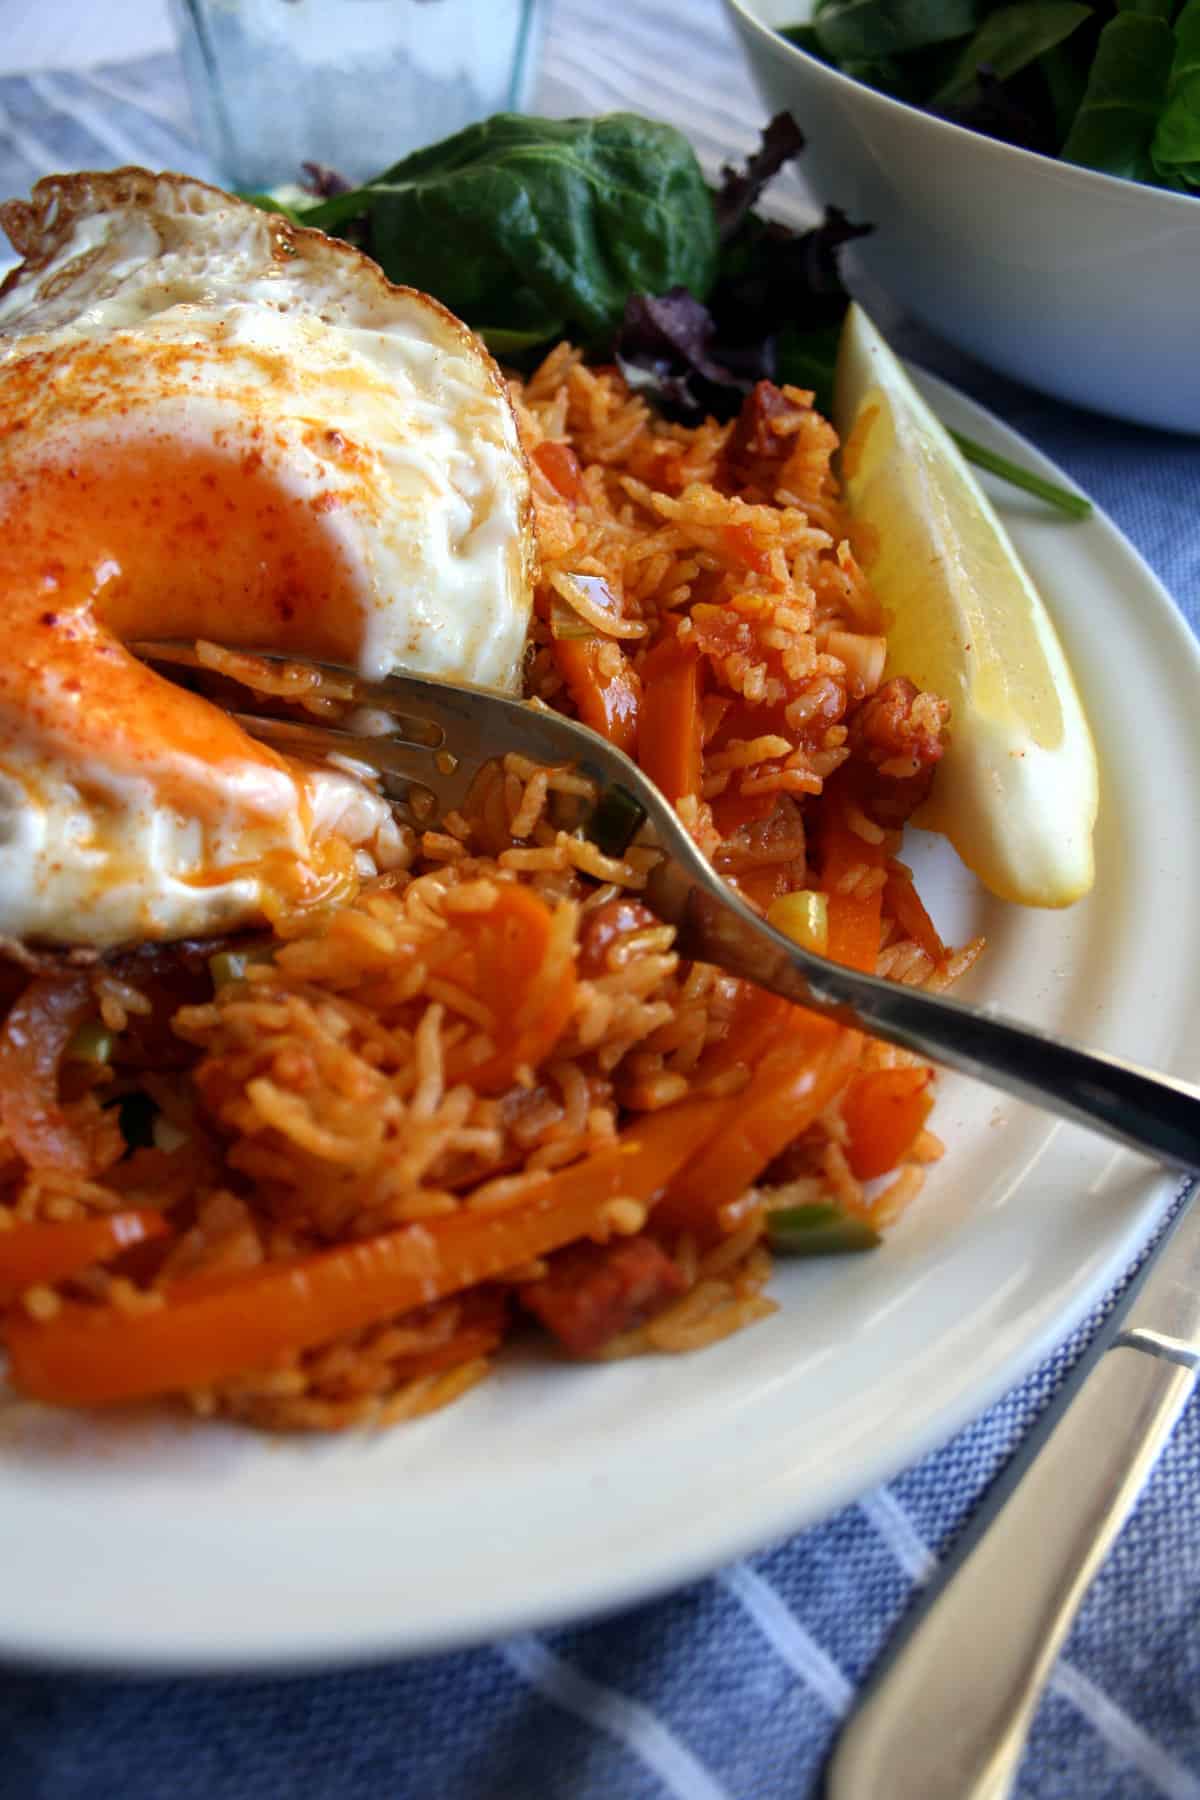 A plate with paella and an egg cut open with a fork.